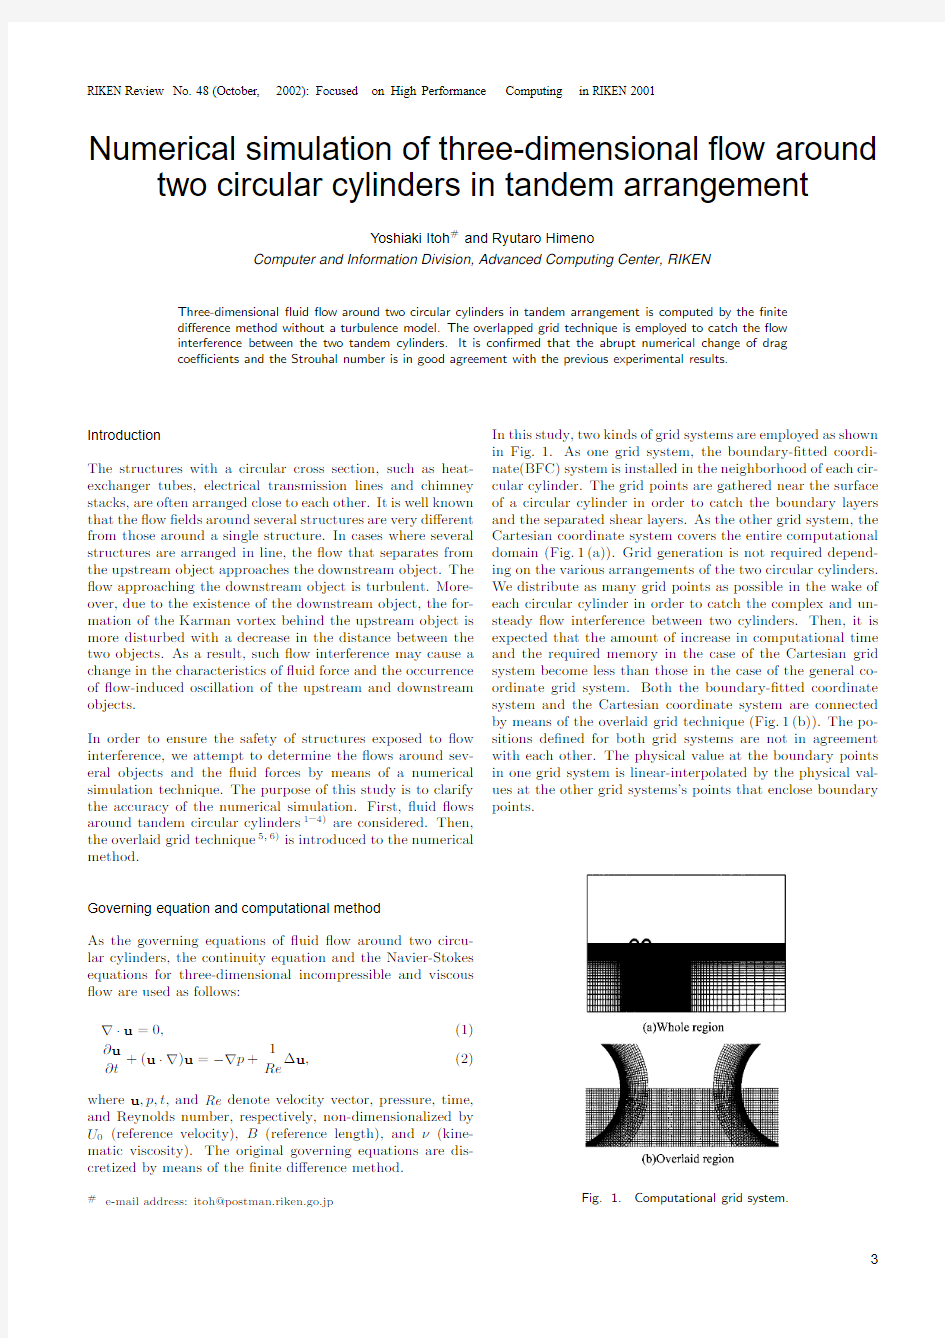 Numerical simulation of three-dimensional flow around two circular cylinders in tandem arrangement